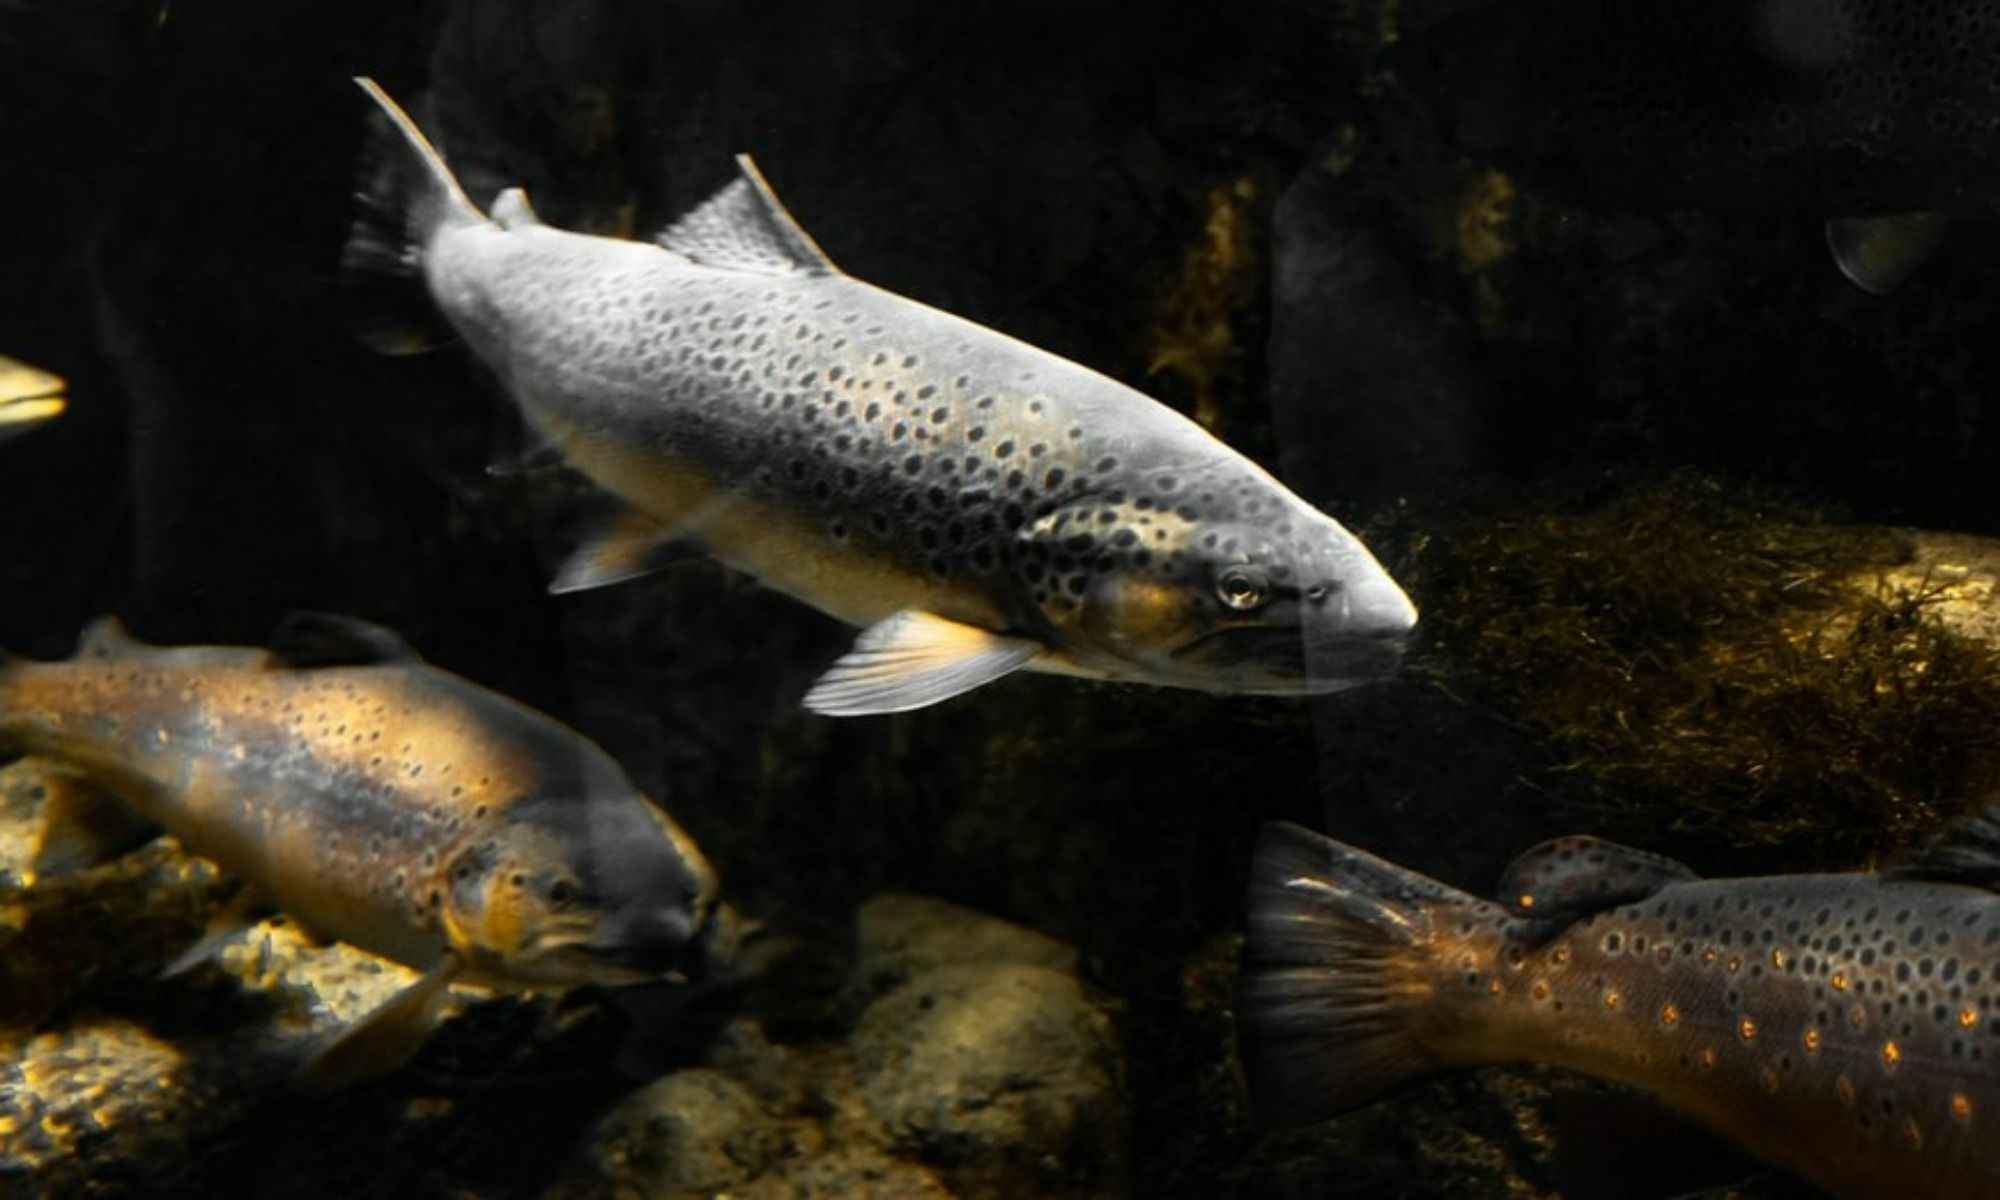 The Trout Diet: What Do They Eat?